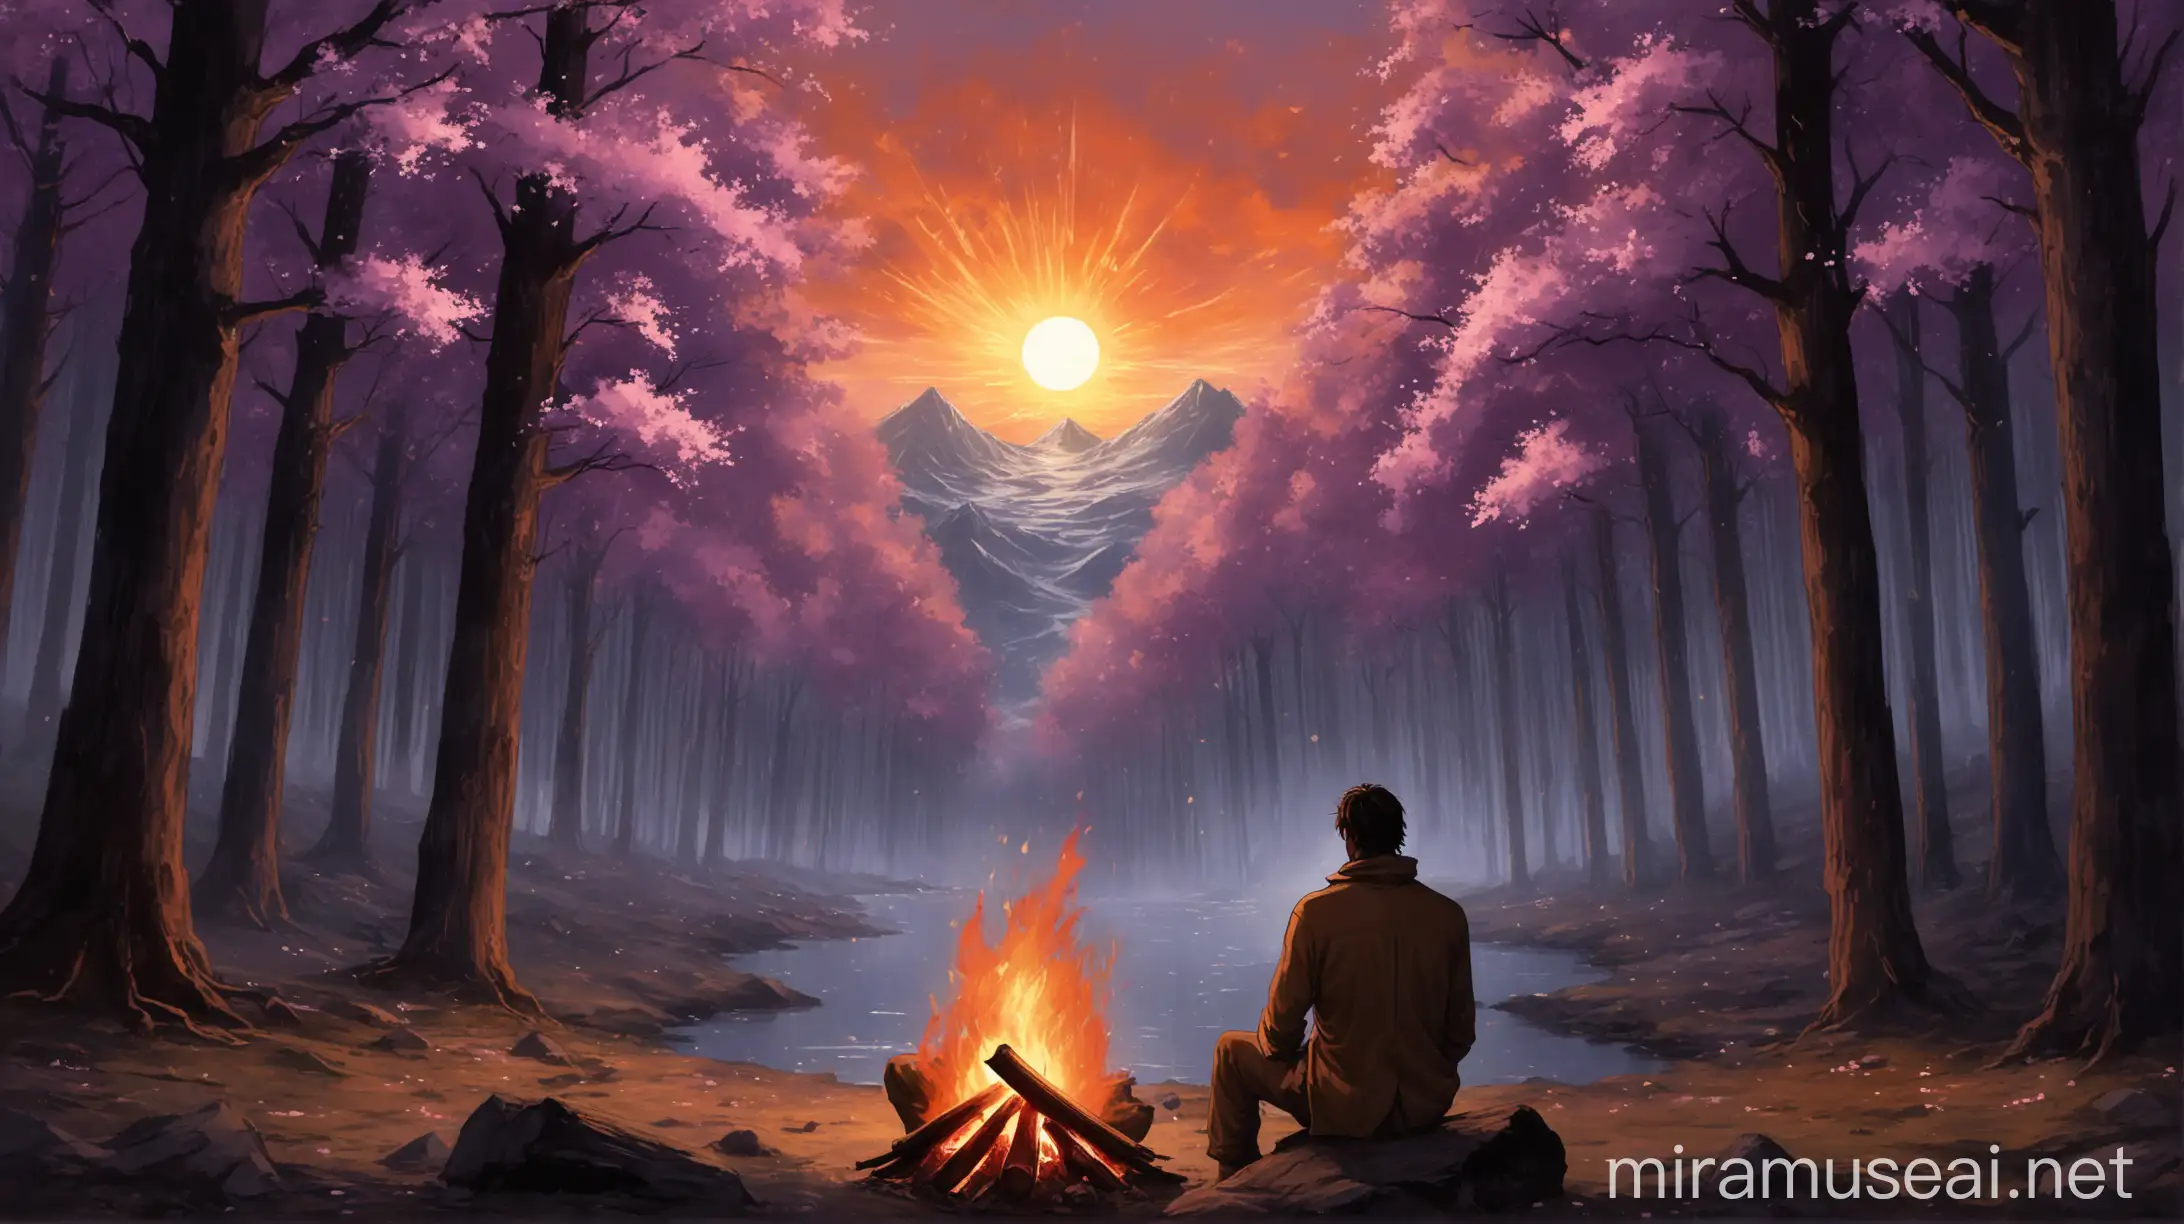 Since I can't generate images directly, I'll do my best to describe the scene in a way that might help you visualize it:

The man in his thirties sits tall and straight, his silhouette outlined against the glowing embers of the campfire. He wears a simple yet rugged attire, fitting for the wilderness he finds himself in. His hair, dark and tousled, falls just above his shoulders. Despite his back being turned, there's a sense of strength and determination in his posture, hinting at a journey filled with trials and battles.

The forest around him is lush and vibrant, with towering trees reaching towards the sky. Cherry blossom trees stand out among the greenery, their delicate pink blooms adding a touch of ethereal beauty to the scene. The setting sun casts a warm golden glow over the landscape, painting the sky in hues of orange and purple.

As the man sits by the campfire, his gaze is fixed on the horizon, where the sun dips below the mountains in the distance. It's a moment of quiet reflection amidst the chaos of his world, a chance to find solace in the tranquility of nature before he continues on his journey.
